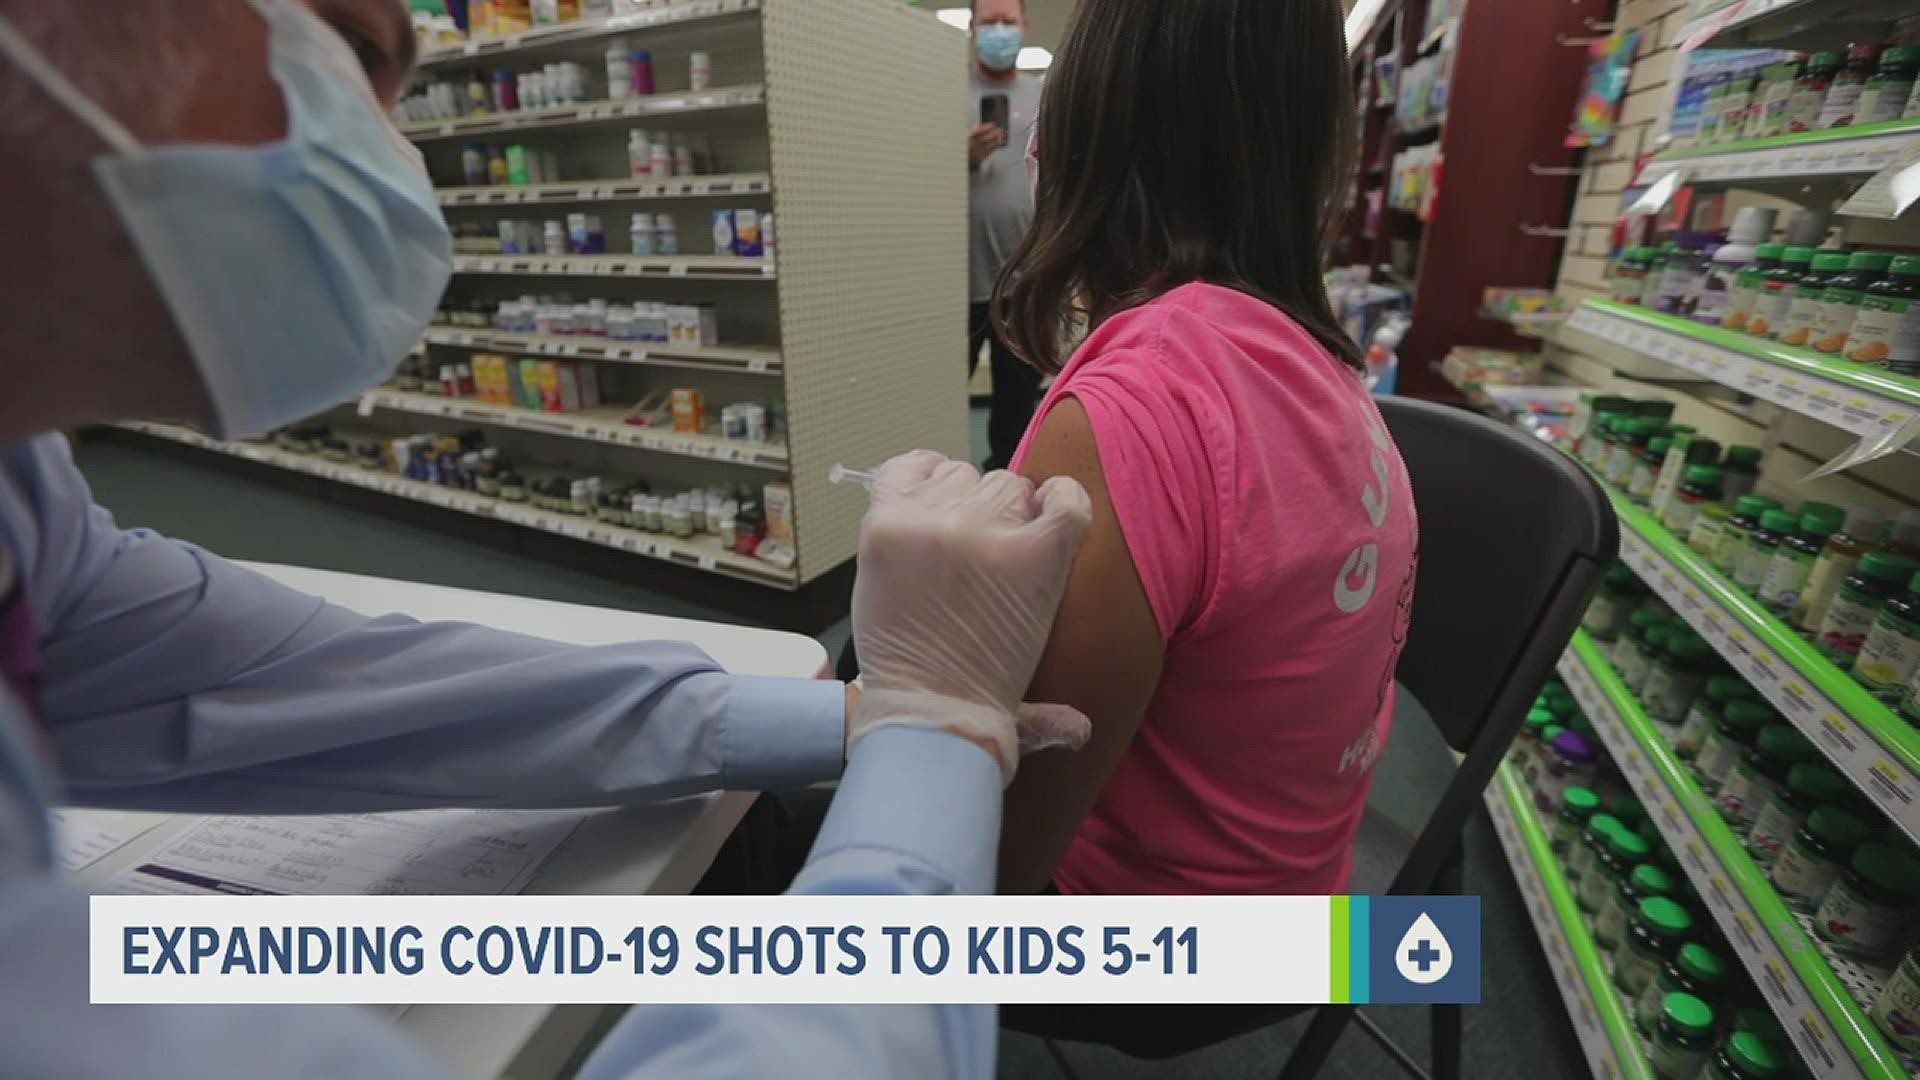 By the end of the month the FDA could consider expanding the use of the Pfizer vaccine to children 5-11